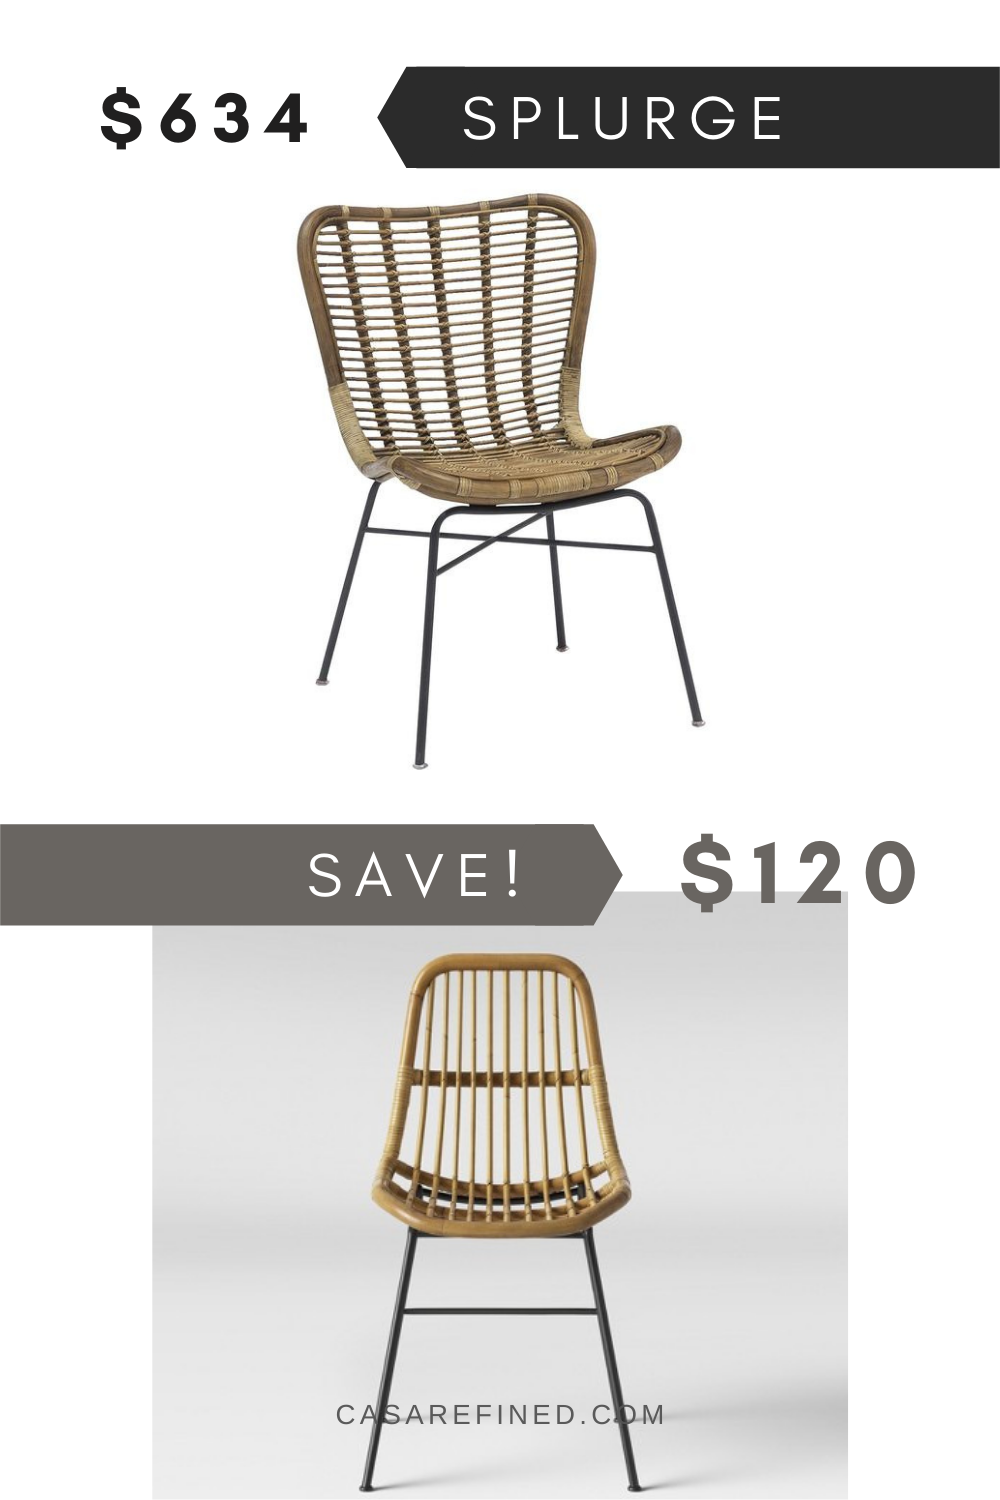 https://casarefined.com/wp-content/uploads/2021/03/HOME-DUPES_-DINING-CHAIR-DUPES-FOR-ALL-BUDGETS_09.png